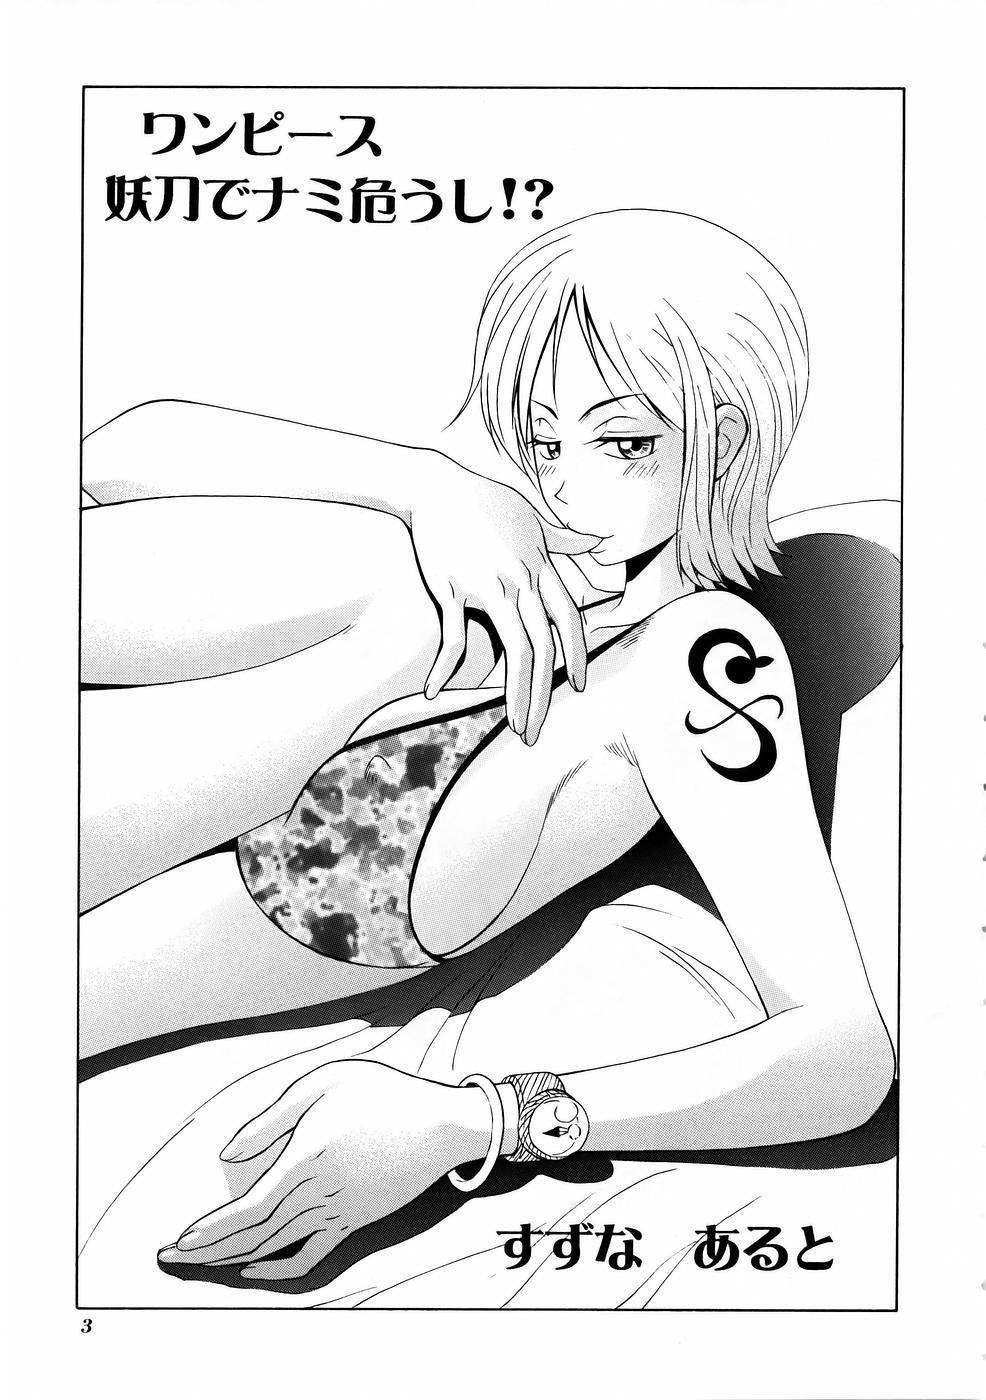 Hottie Mikicy Vol. 4 - One piece Passionate - Page 4